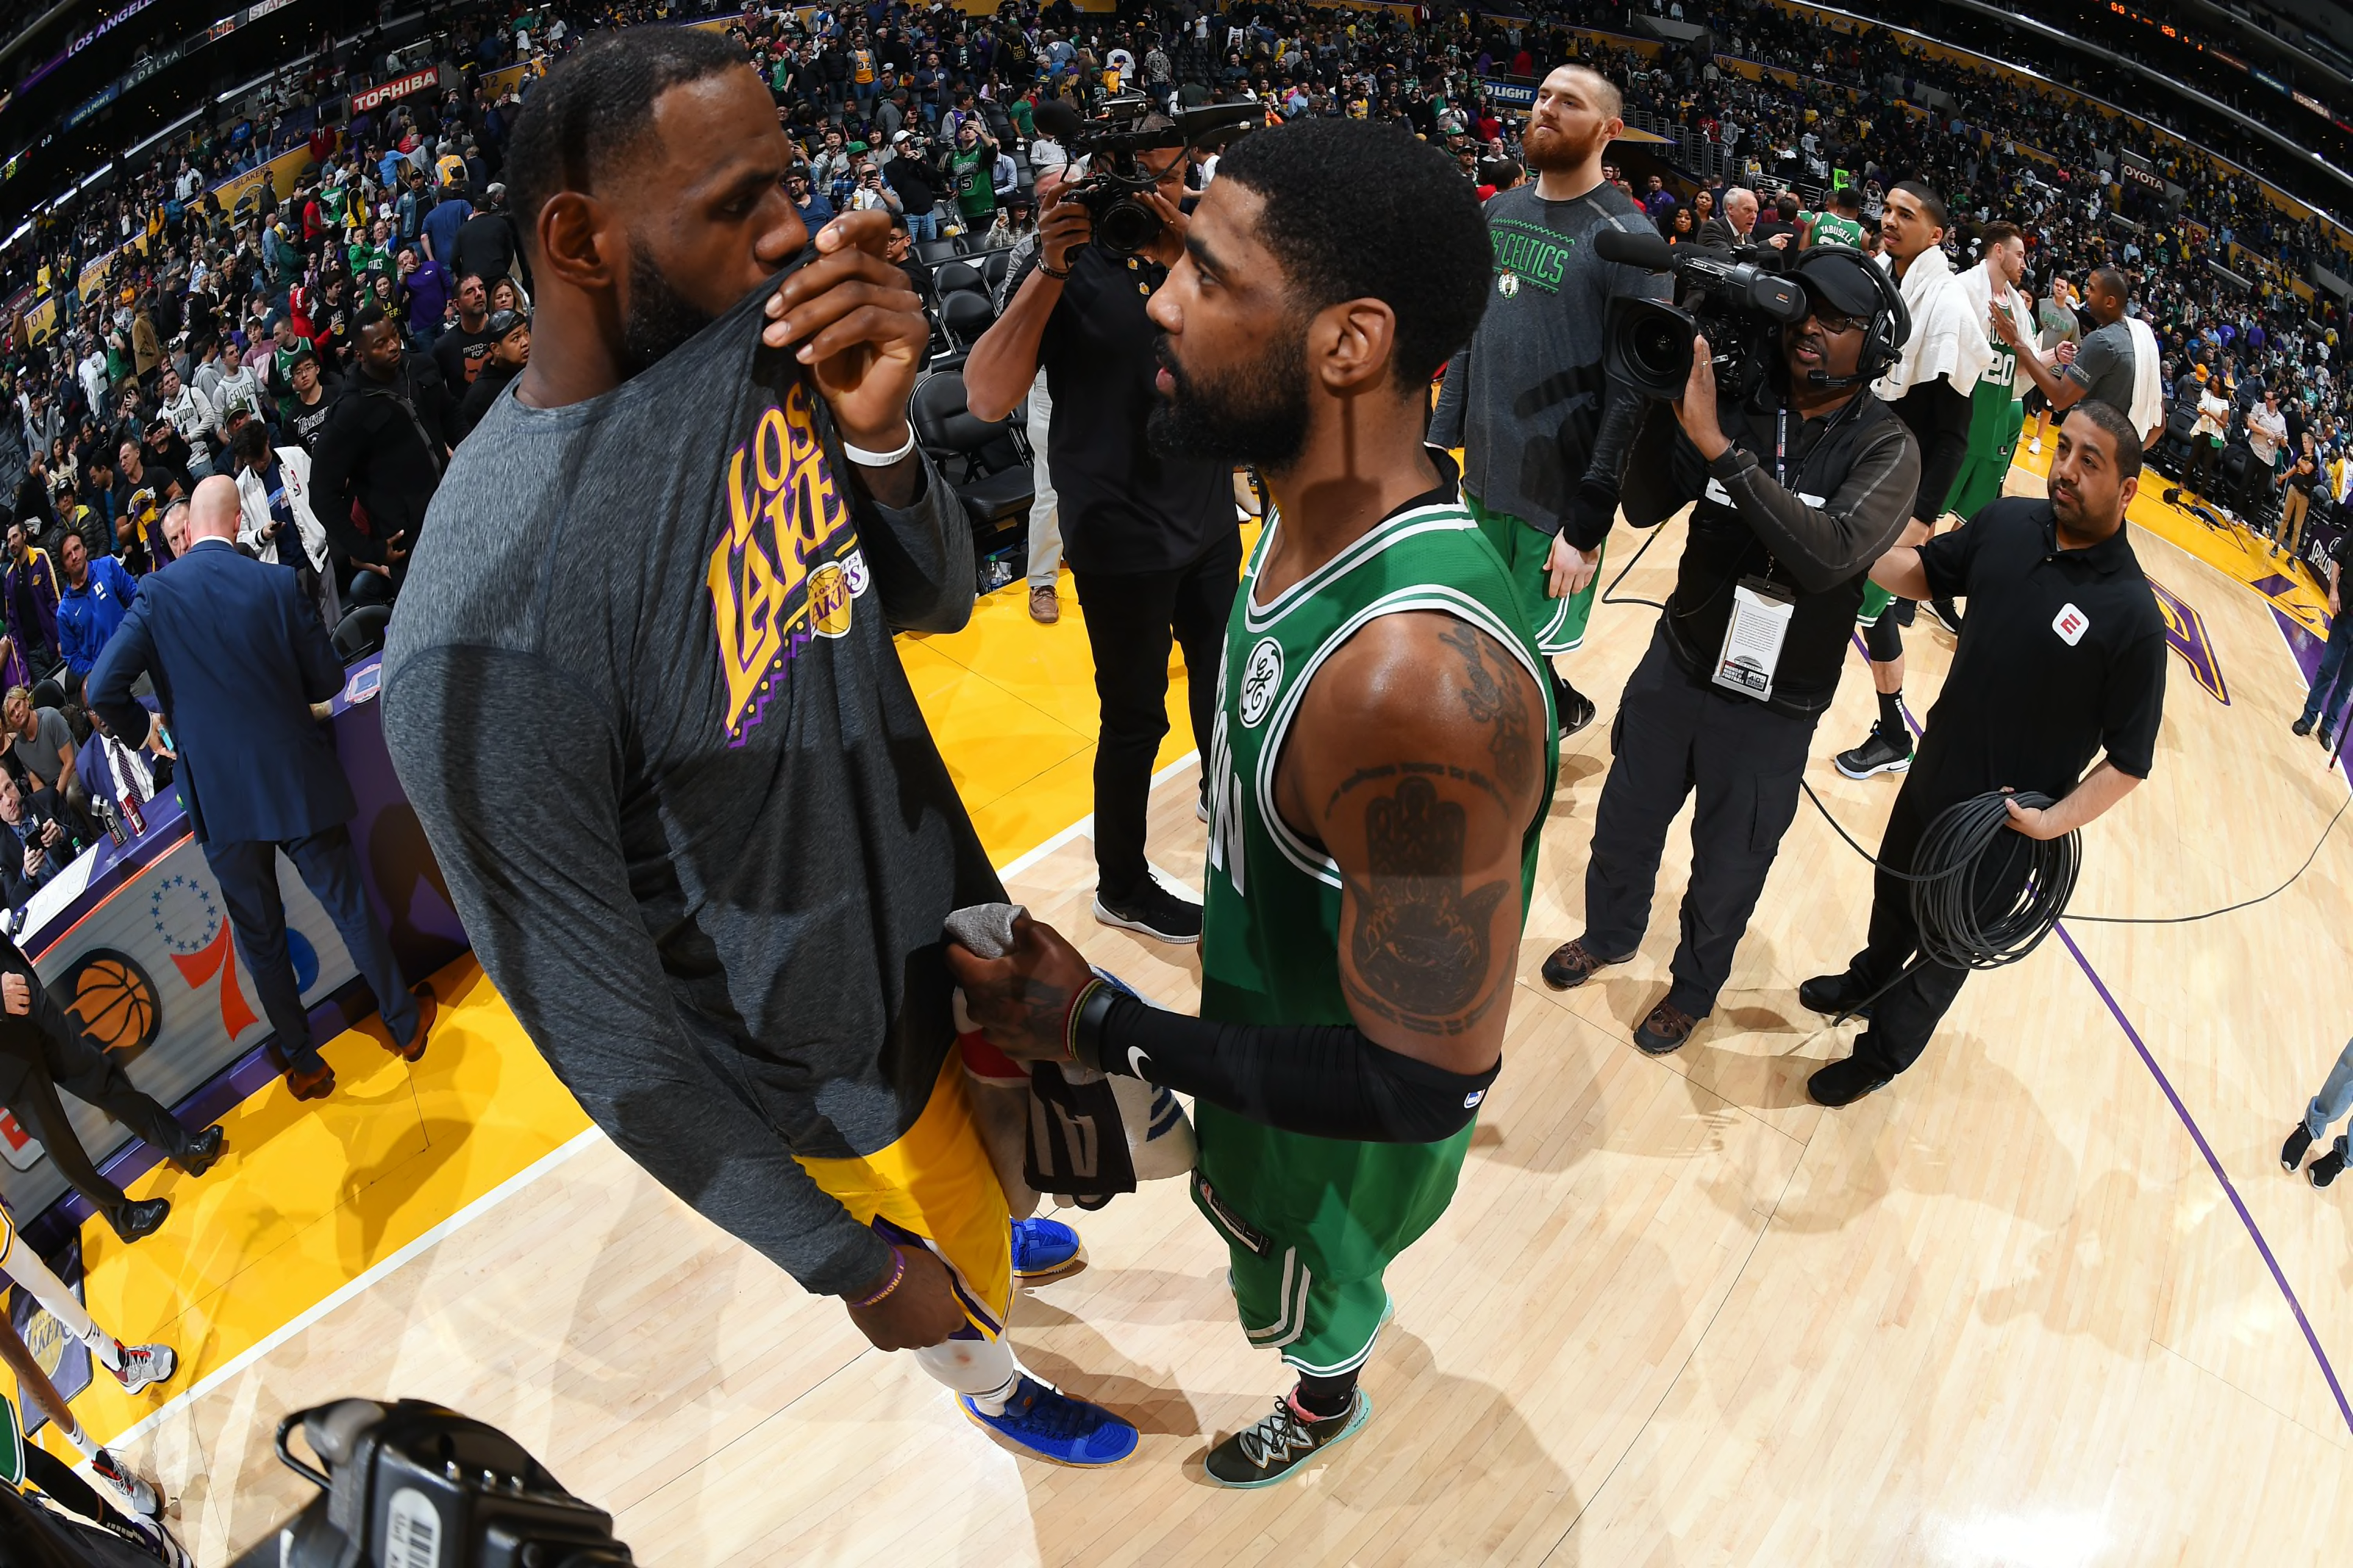 kyrie irving traded to the lakers